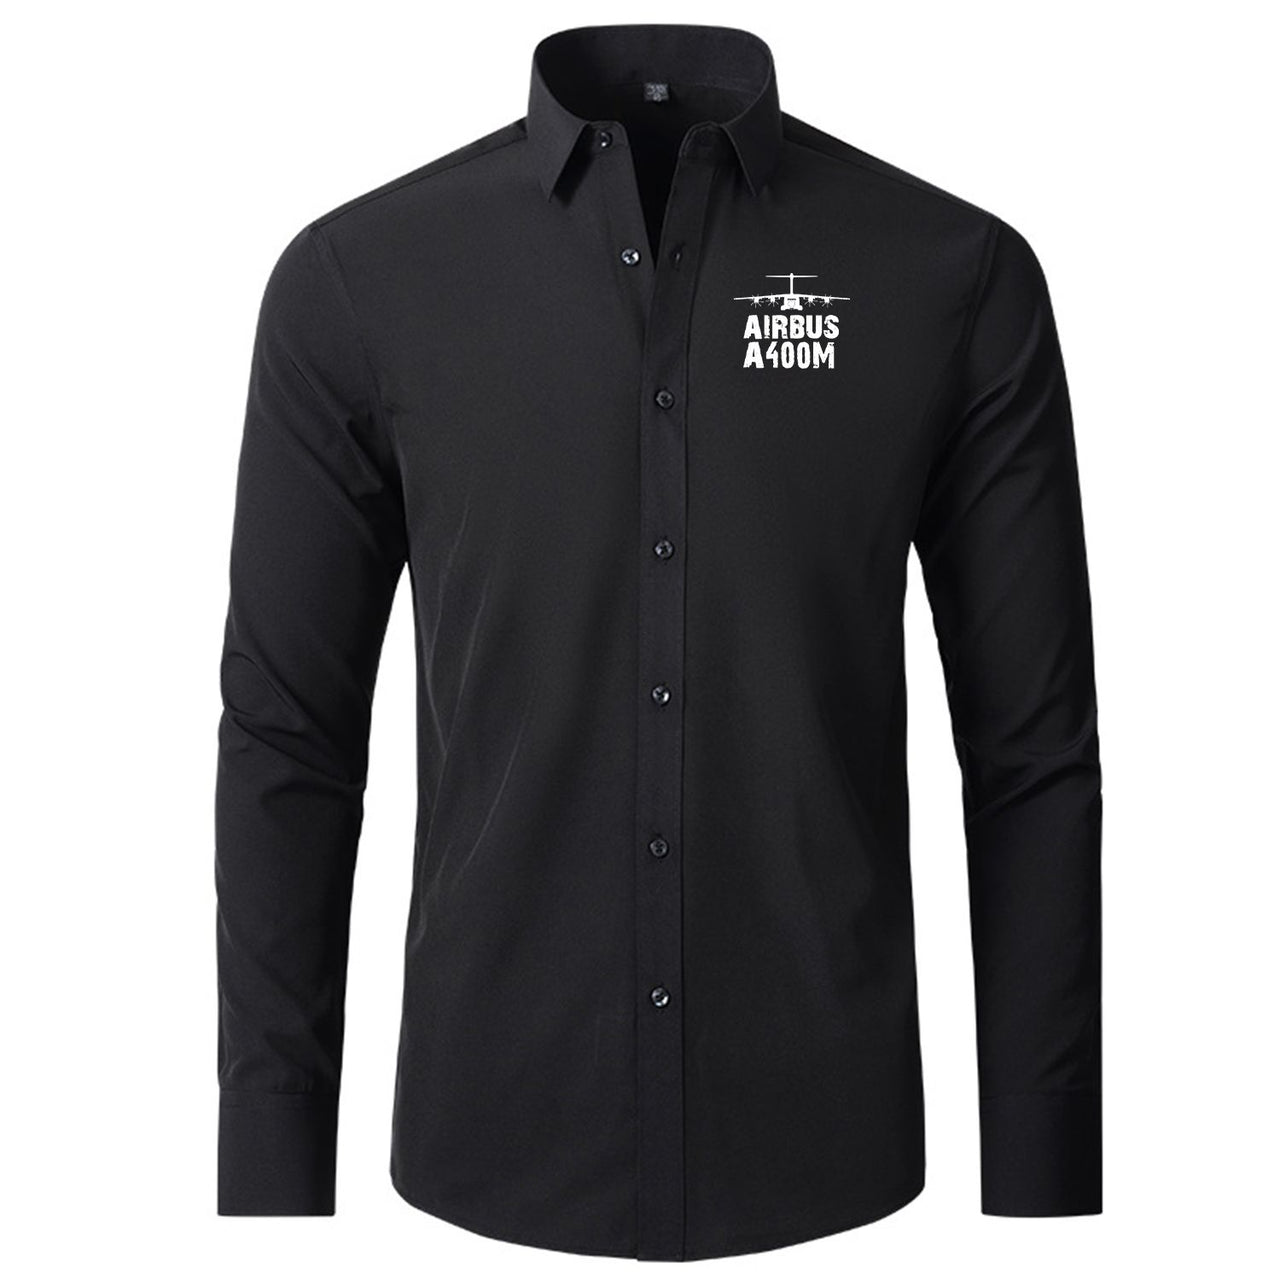 Airbus A400M & Plane Designed Long Sleeve Shirts